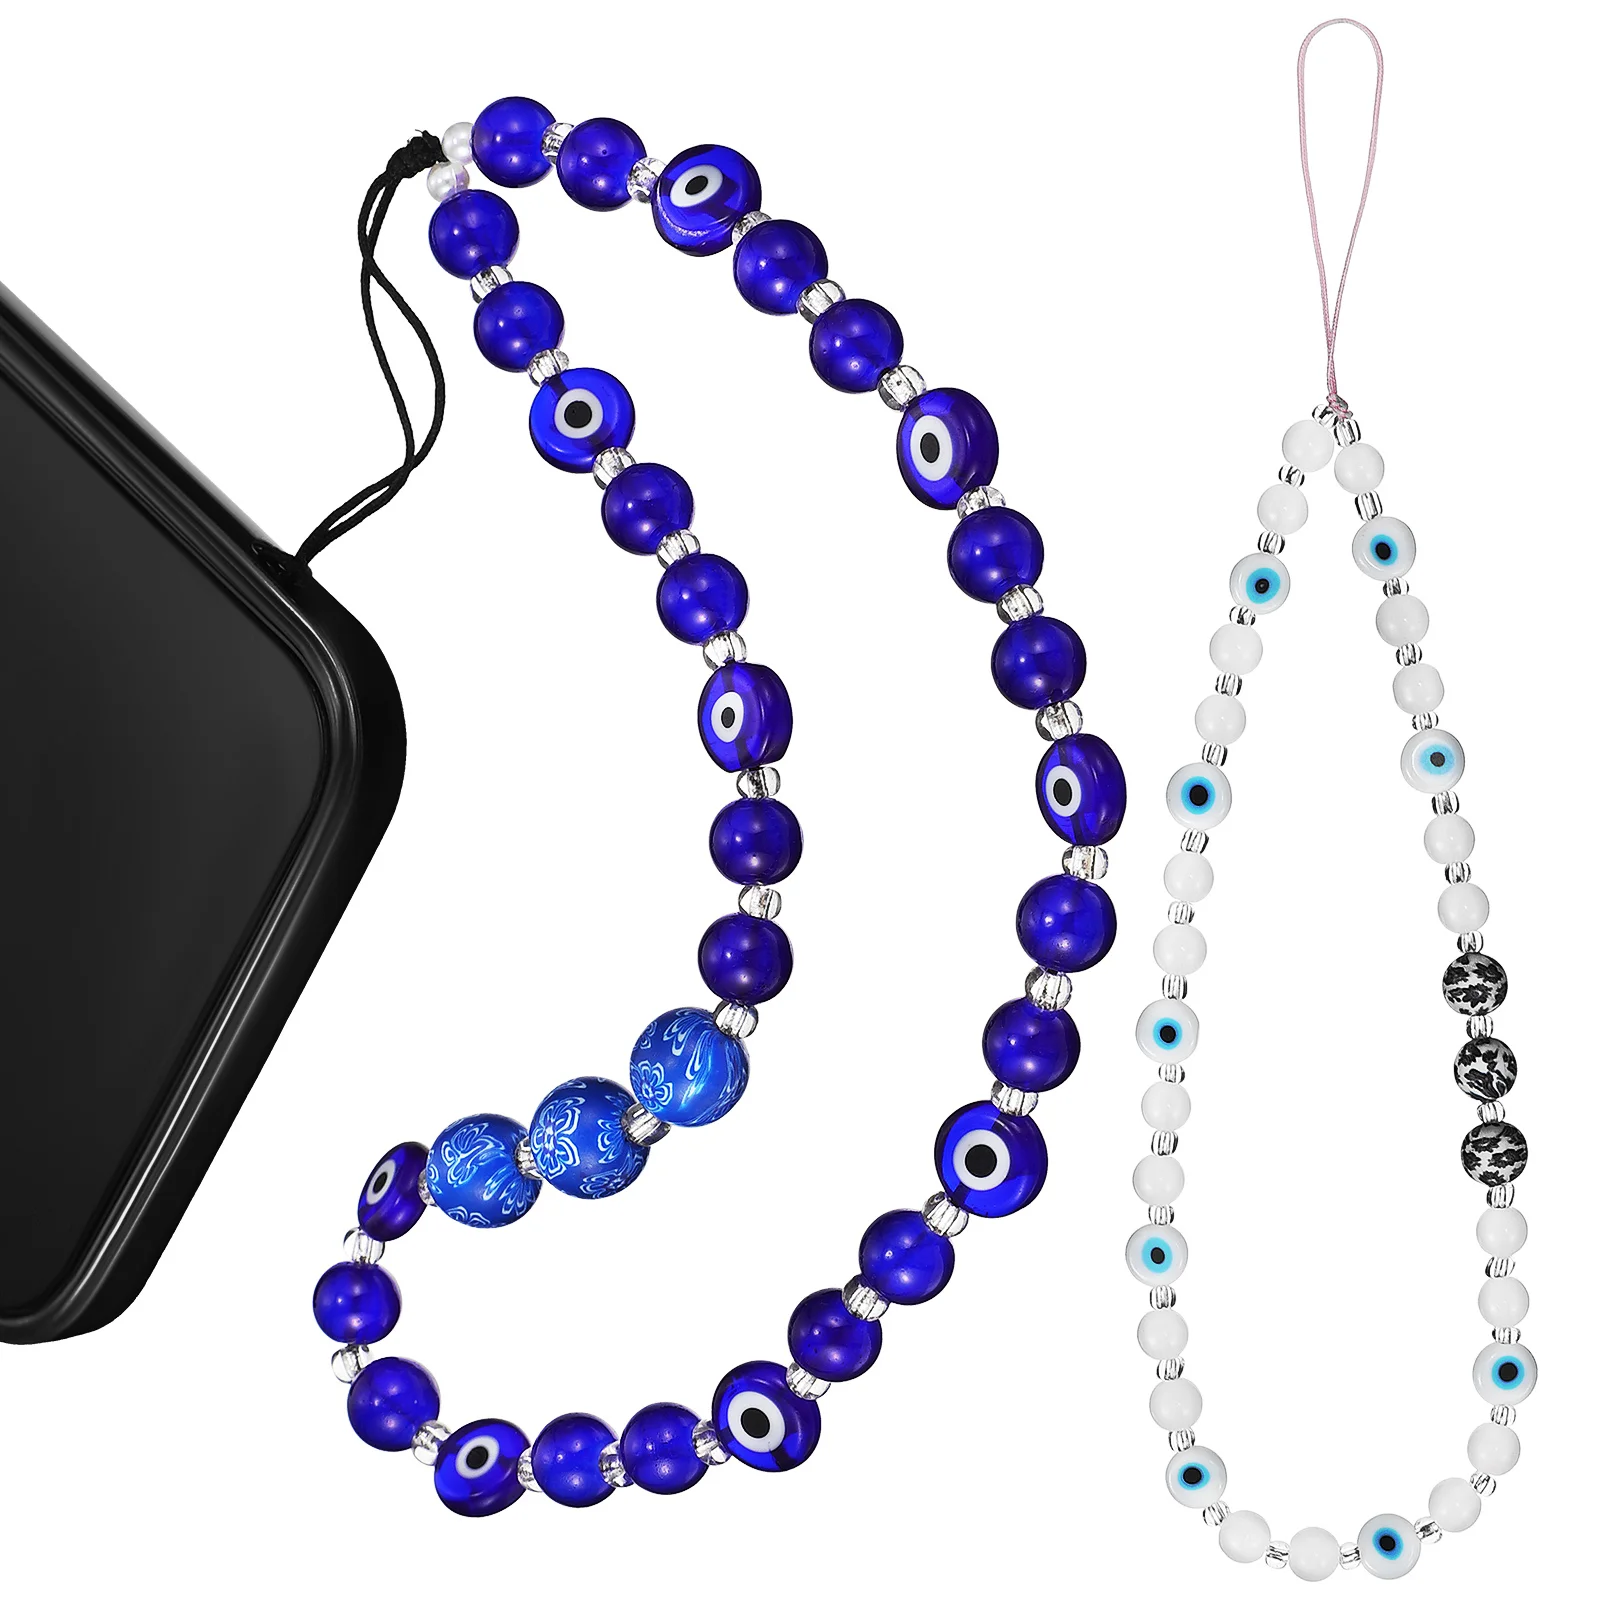 

Lanyard Phone Lanyards Charms Accessories Aesthetic Strap Chain Evil Eye Straps